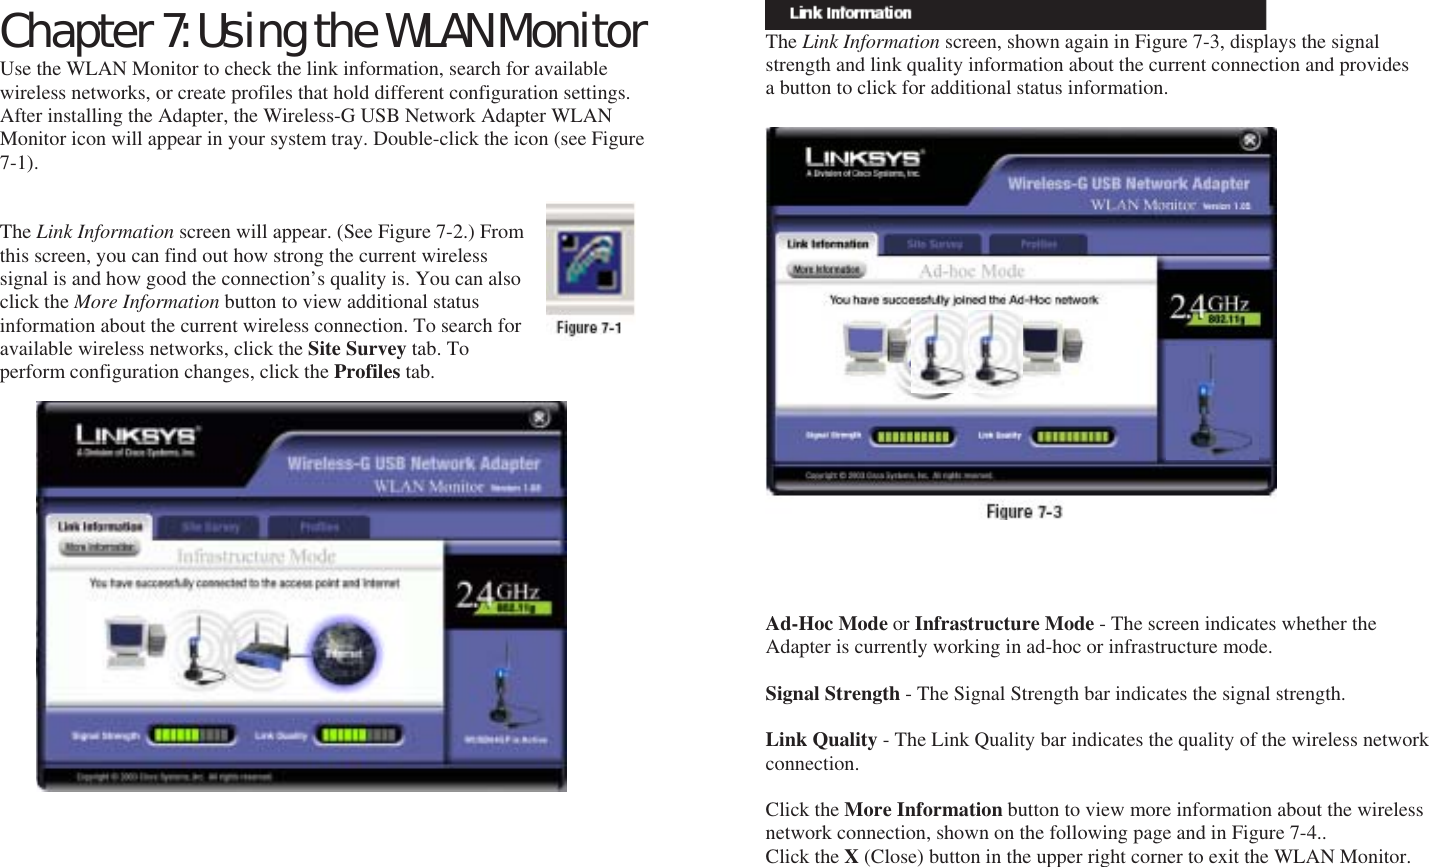 Chapter 7: Using the WLAN Monitor Use the WLAN Monitor to check the link information, search for available wireless networks, or create profiles that hold different configuration settings. After installing the Adapter, the Wireless-G USB Network Adapter WLAN Monitor icon will appear in your system tray. Double-click the icon (see Figure 7-1).   The Link Information screen will appear. (See Figure 7-2.) From this screen, you can find out how strong the current wireless signal is and how good the connection’s quality is. You can also click the More Information button to view additional status information about the current wireless connection. To search for available wireless networks, click the Site Survey tab. To perform configuration changes, click the Profiles tab.    Accessing the WLAN Monitor Overview       The Link Information screen, shown again in Figure 7-3, displays the signal strength and link quality information about the current connection and provides a button to click for additional status information.                       Ad-Hoc Mode or Infrastructure Mode - The screen indicates whether the Adapter is currently working in ad-hoc or infrastructure mode.  Signal Strength - The Signal Strength bar indicates the signal strength.  Link Quality - The Link Quality bar indicates the quality of the wireless network connection.  Click the More Information button to view more information about the wireless network connection, shown on the following page and in Figure 7-4.. Click the X (Close) button in the upper right corner to exit the WLAN Monitor.     